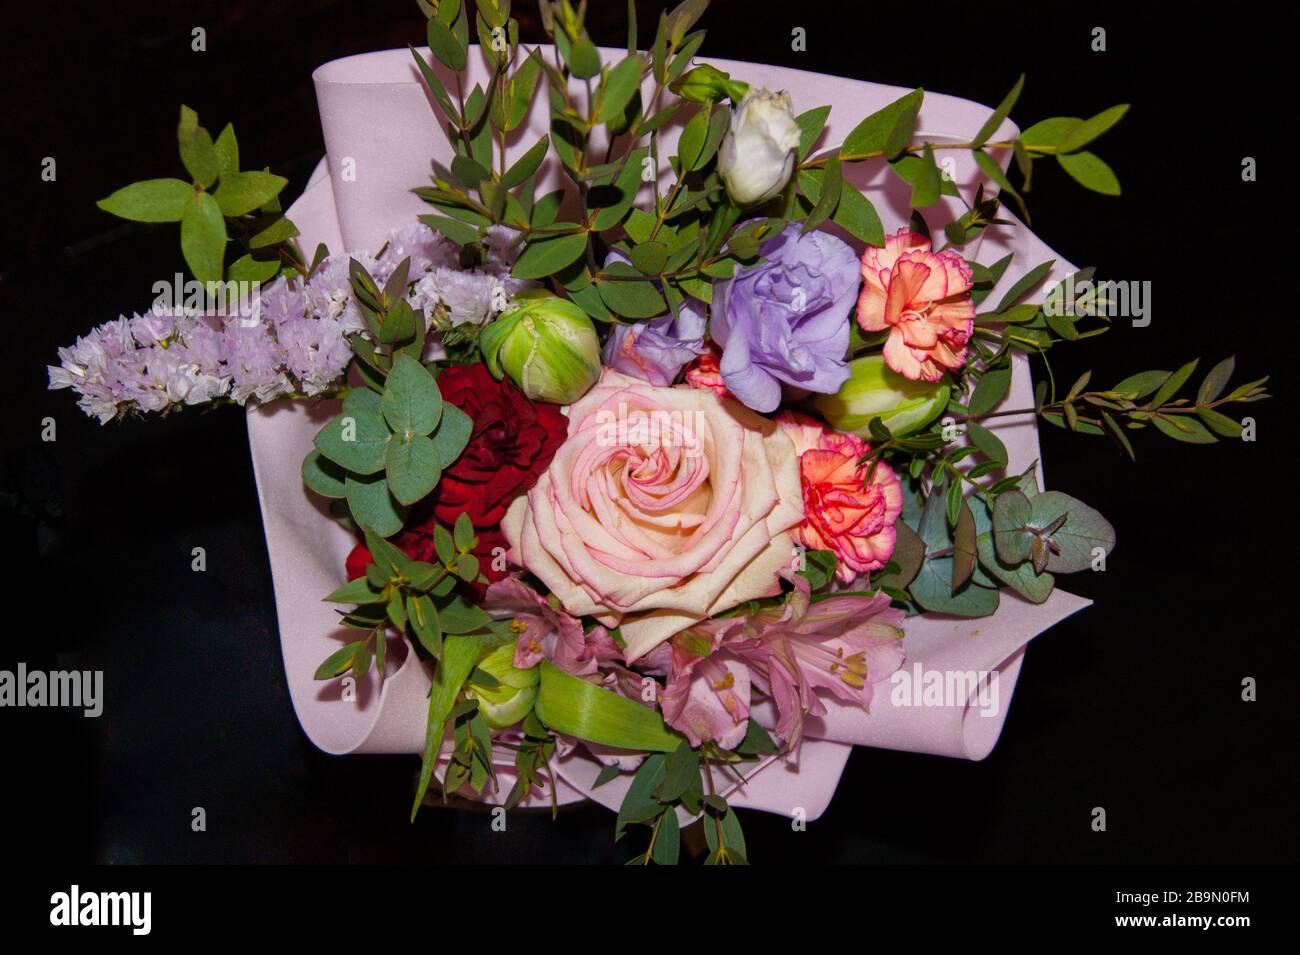 Delicate bouquet of different flowers in pink packaging. Close-up horizontal photo. Stock Photo